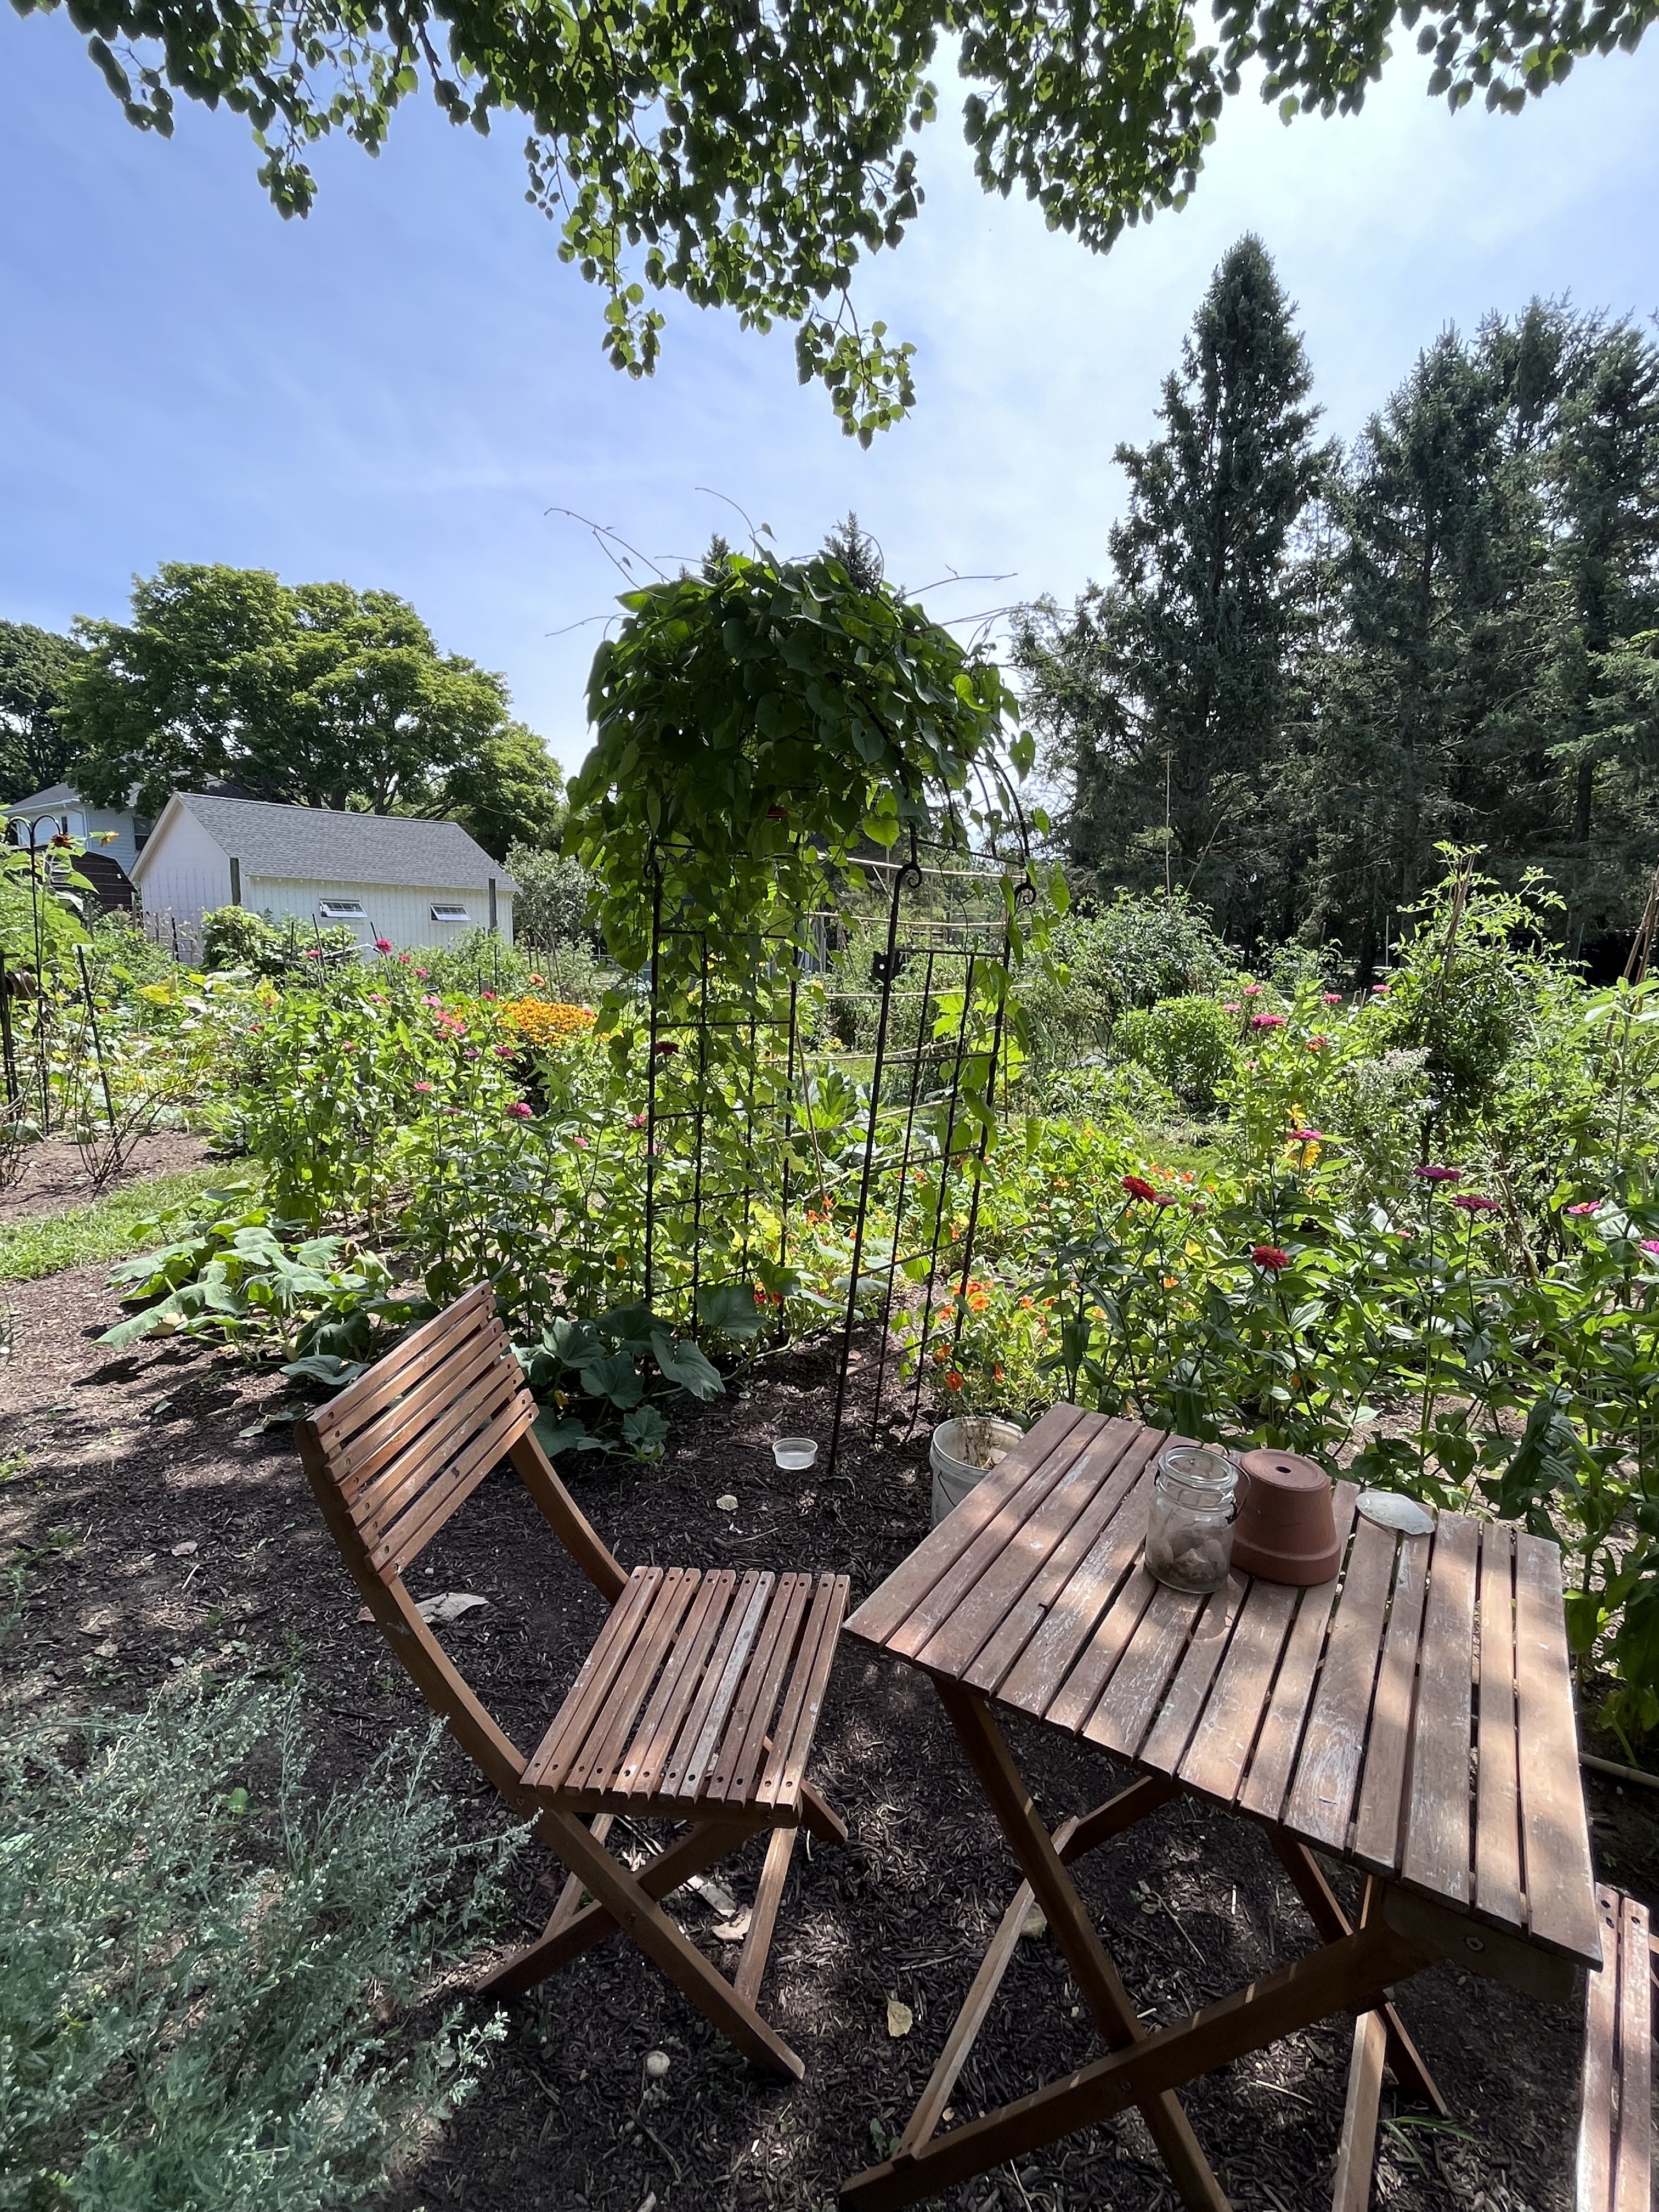 community garden plot with table and chair